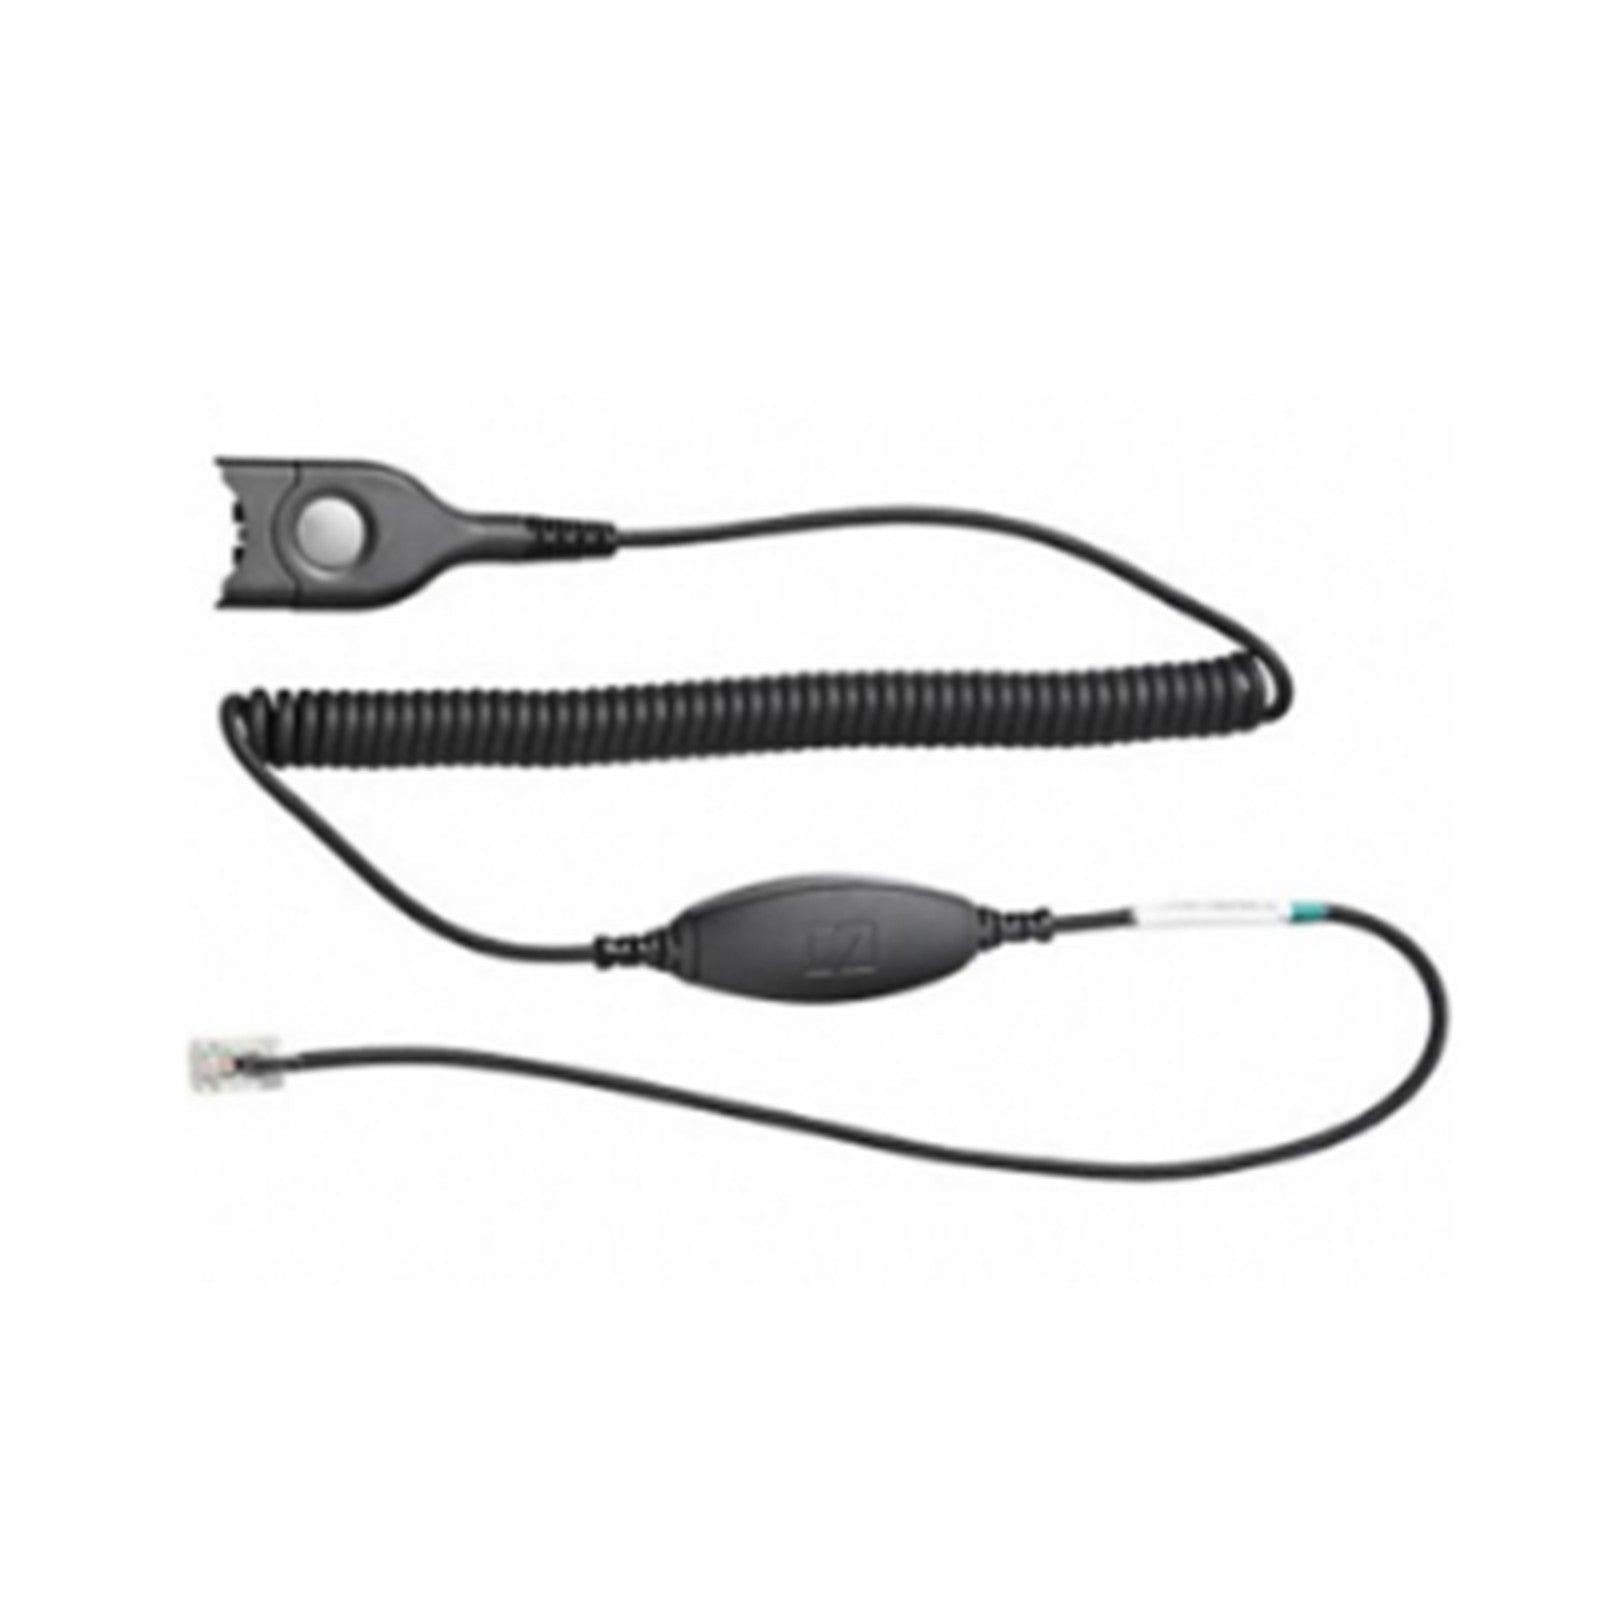 Sennheiser Bottom cable: Easy Disconnect to modular plug - coiled cable to be used with Avaya 1600/9600 series telephones SENNHEISER